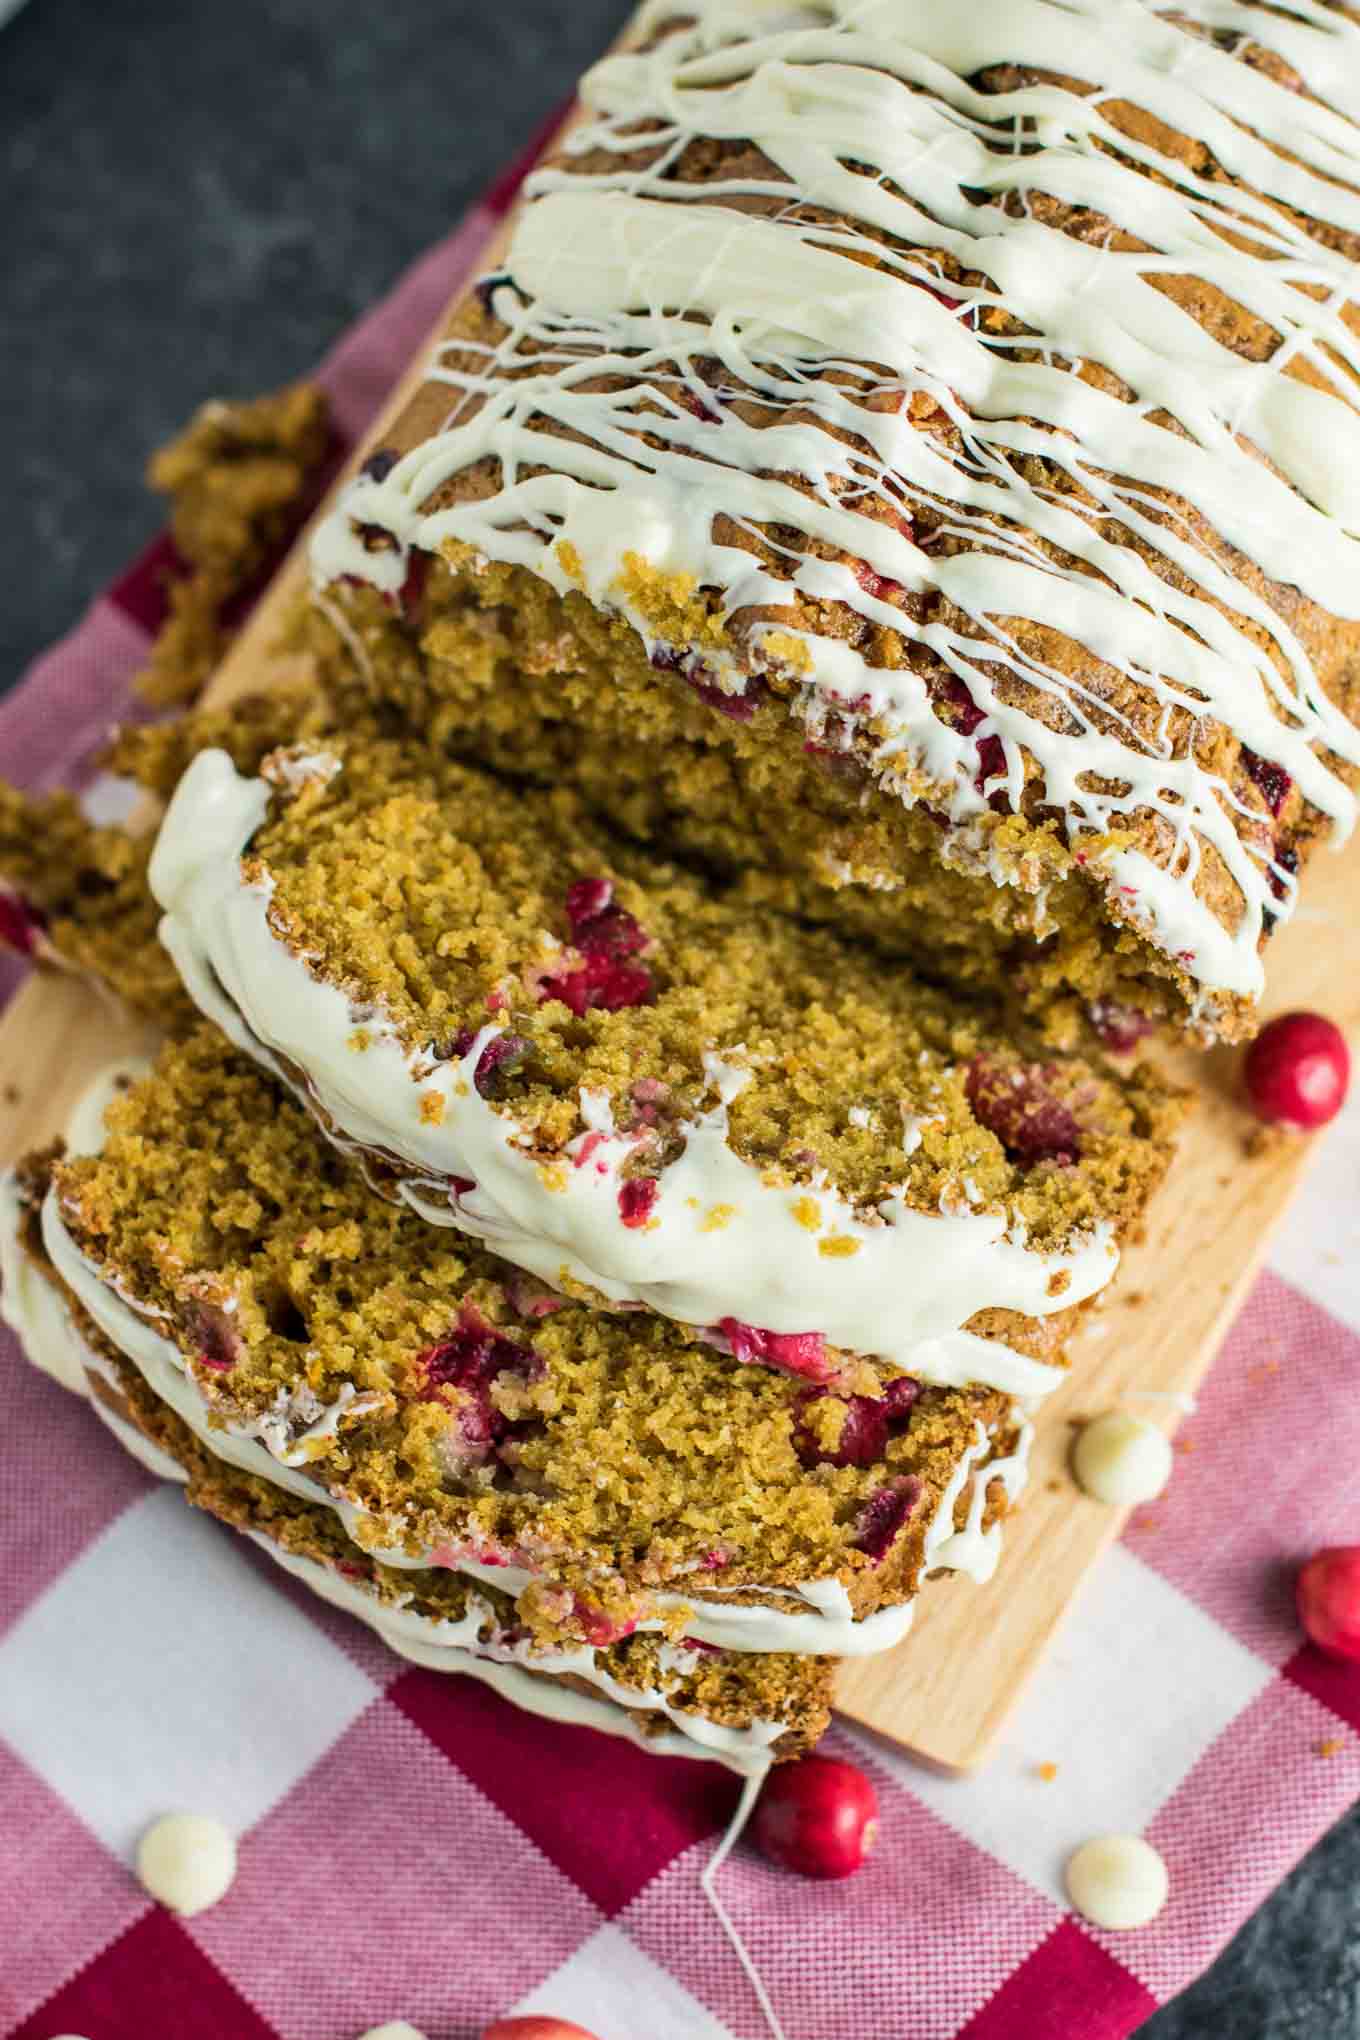 fresh cranberry recipes - White Chocolate Cranberry Eggnog Bread aka “Crack Bread.” Everyone RAVES about this and can’t get enough. Even eggnog haters will love this recipe! #christmasrecipes #eggnog #cranberry #cranberryeggnogbread